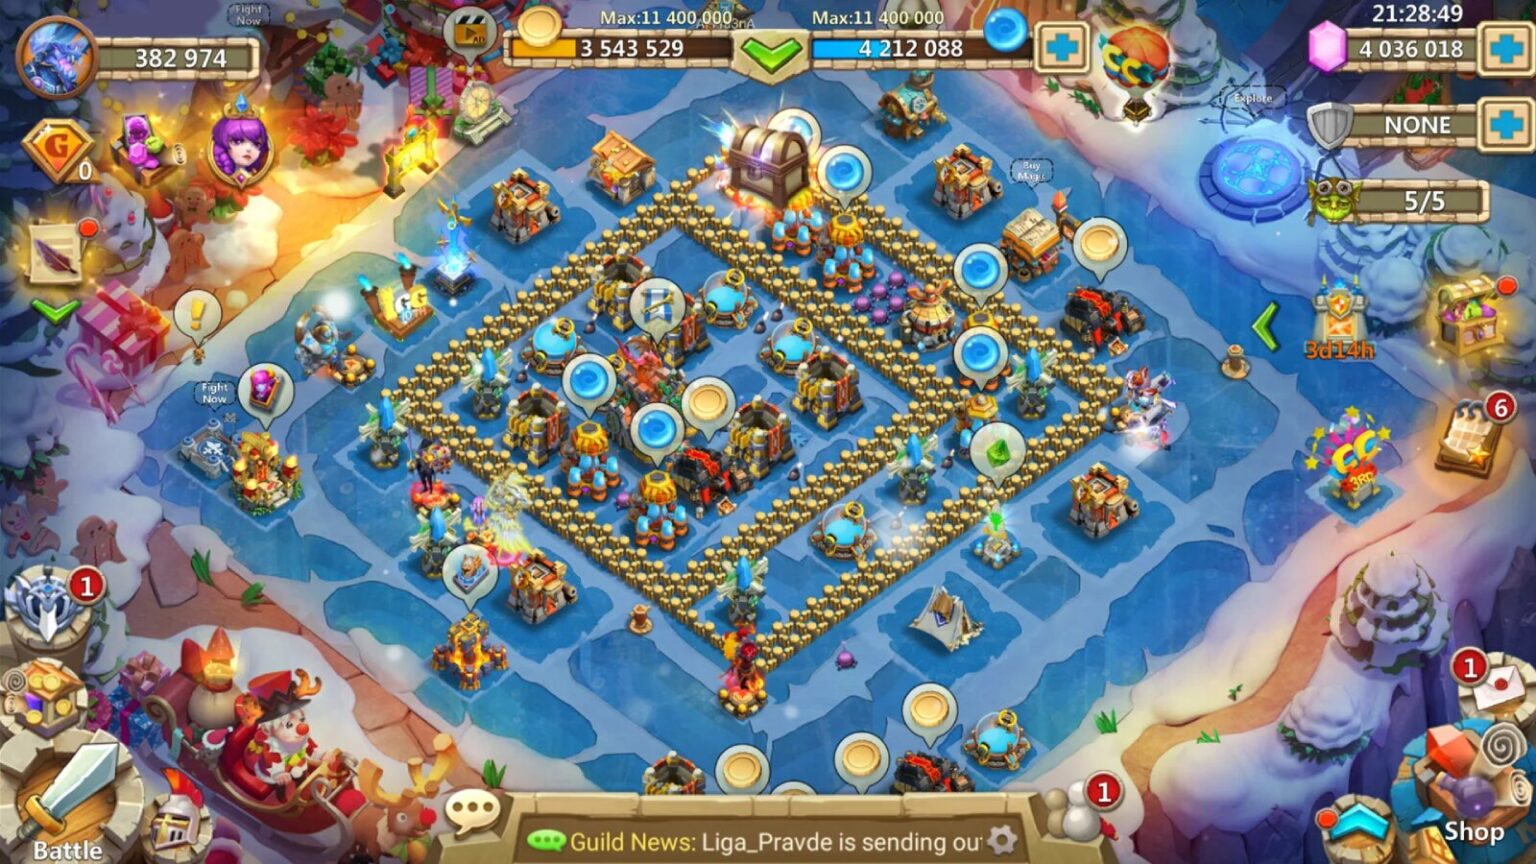 10 games like Clash of Clans you should be playing right now